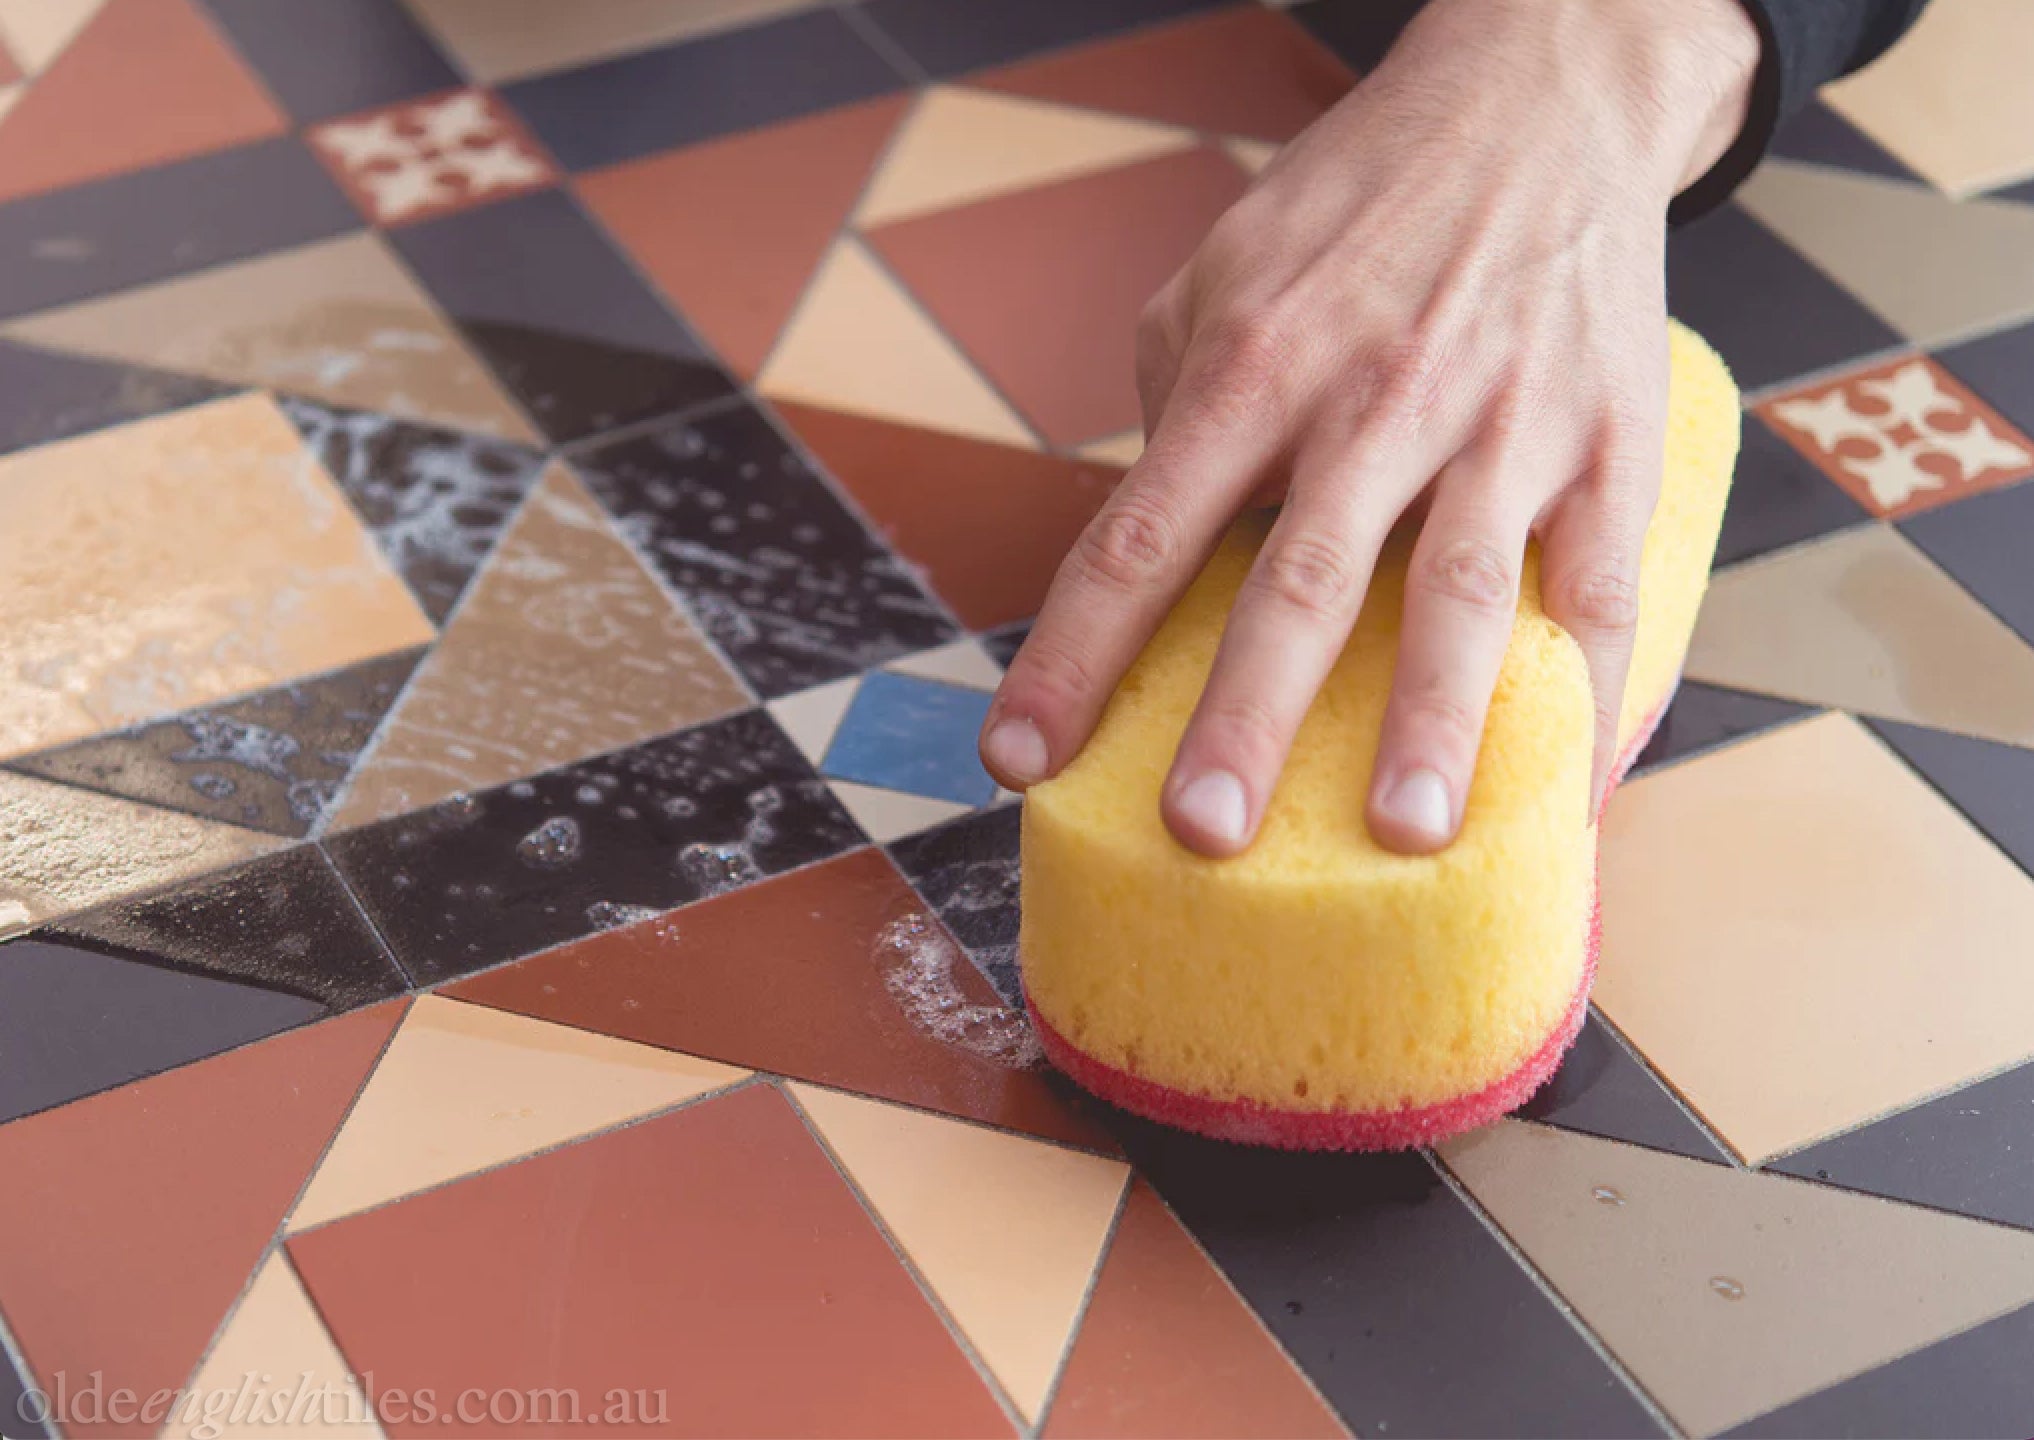 Cleaning your patterned floor tiles